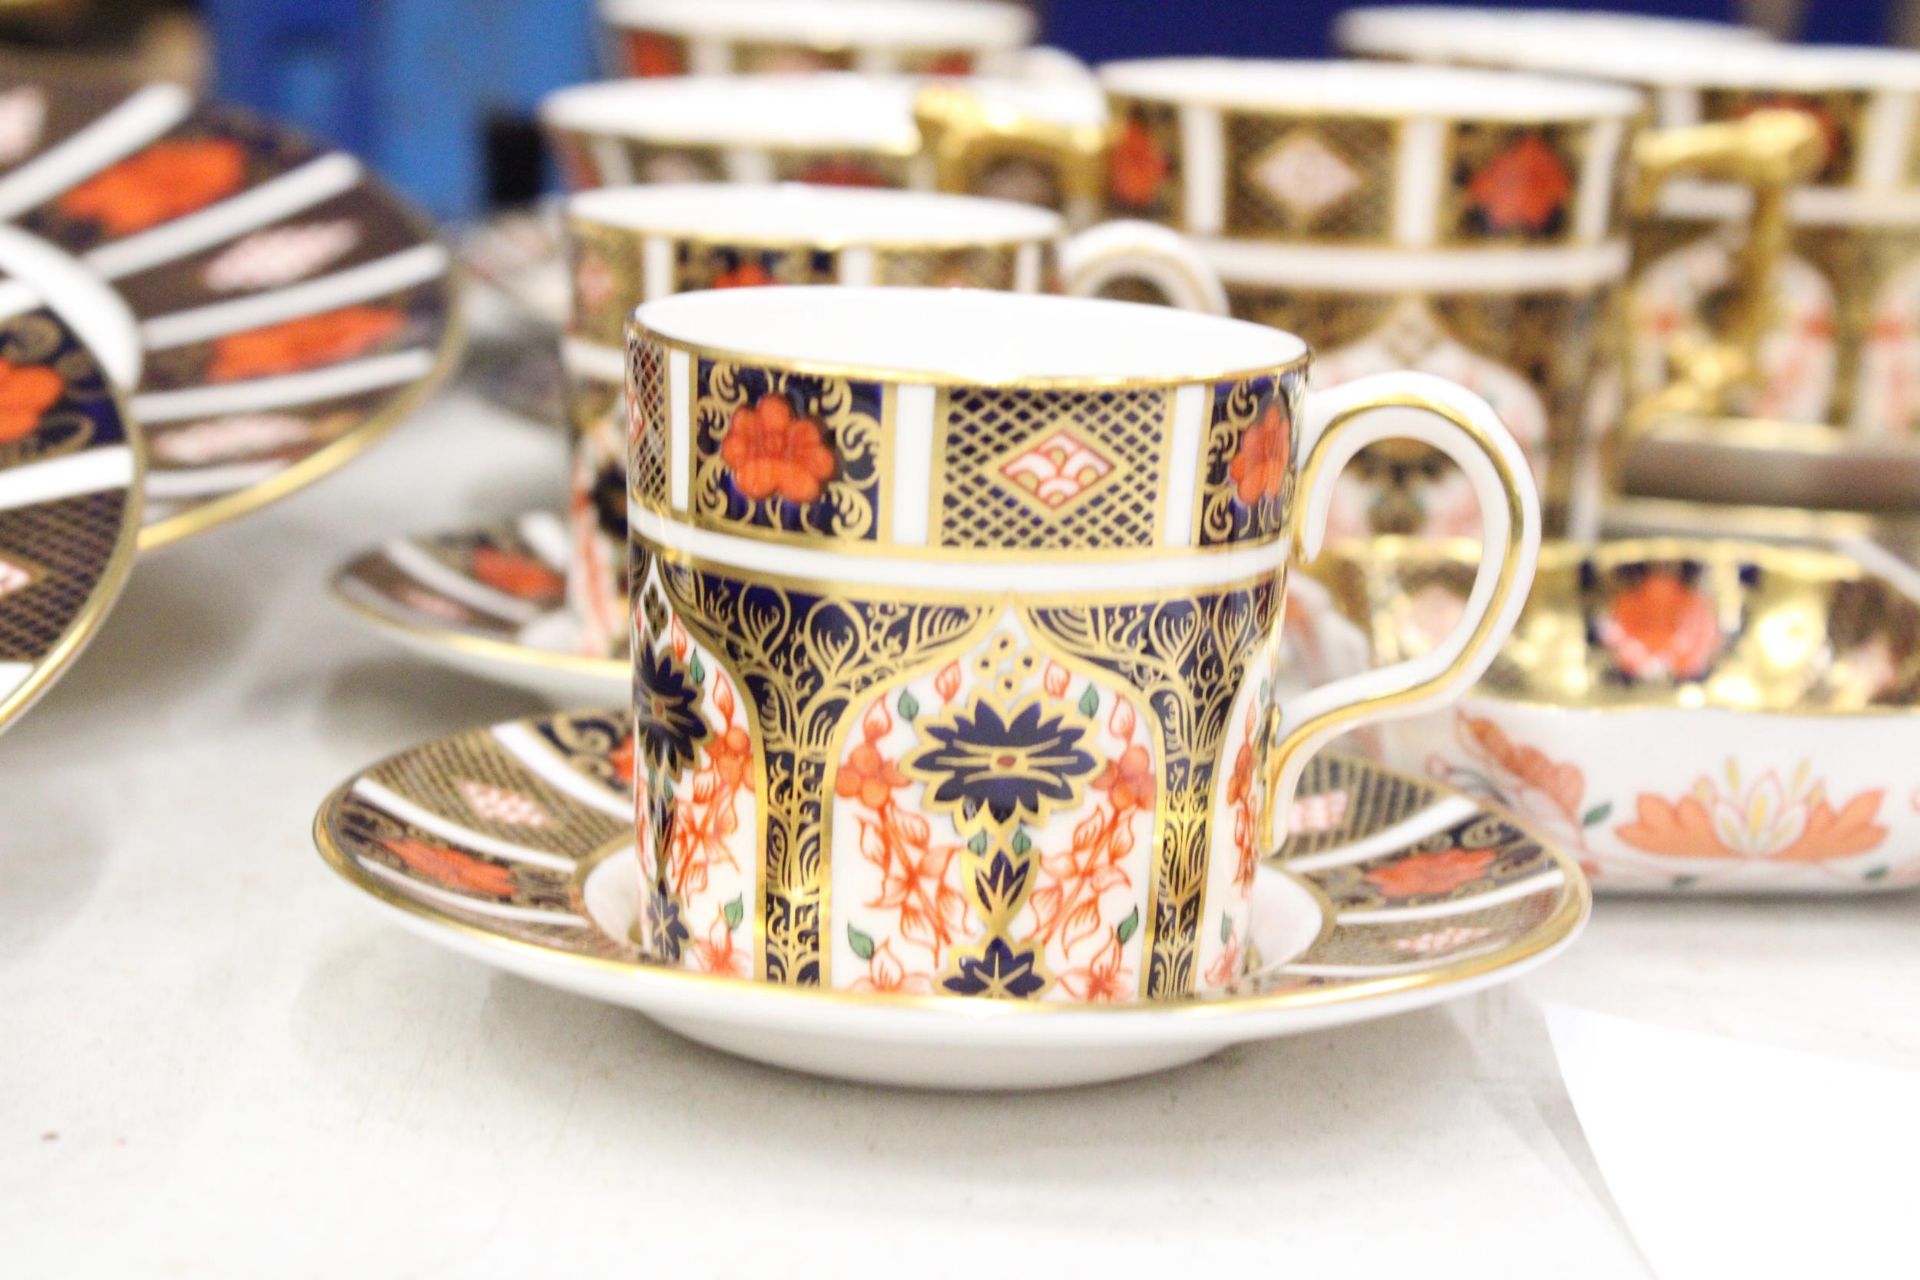 A QUANTITY OF ROYAL CROWN DERBY TO INCLUDE A LOVING CUP , COFFEE CANS AND SAUCERS, TEACUPS AND - Image 4 of 7